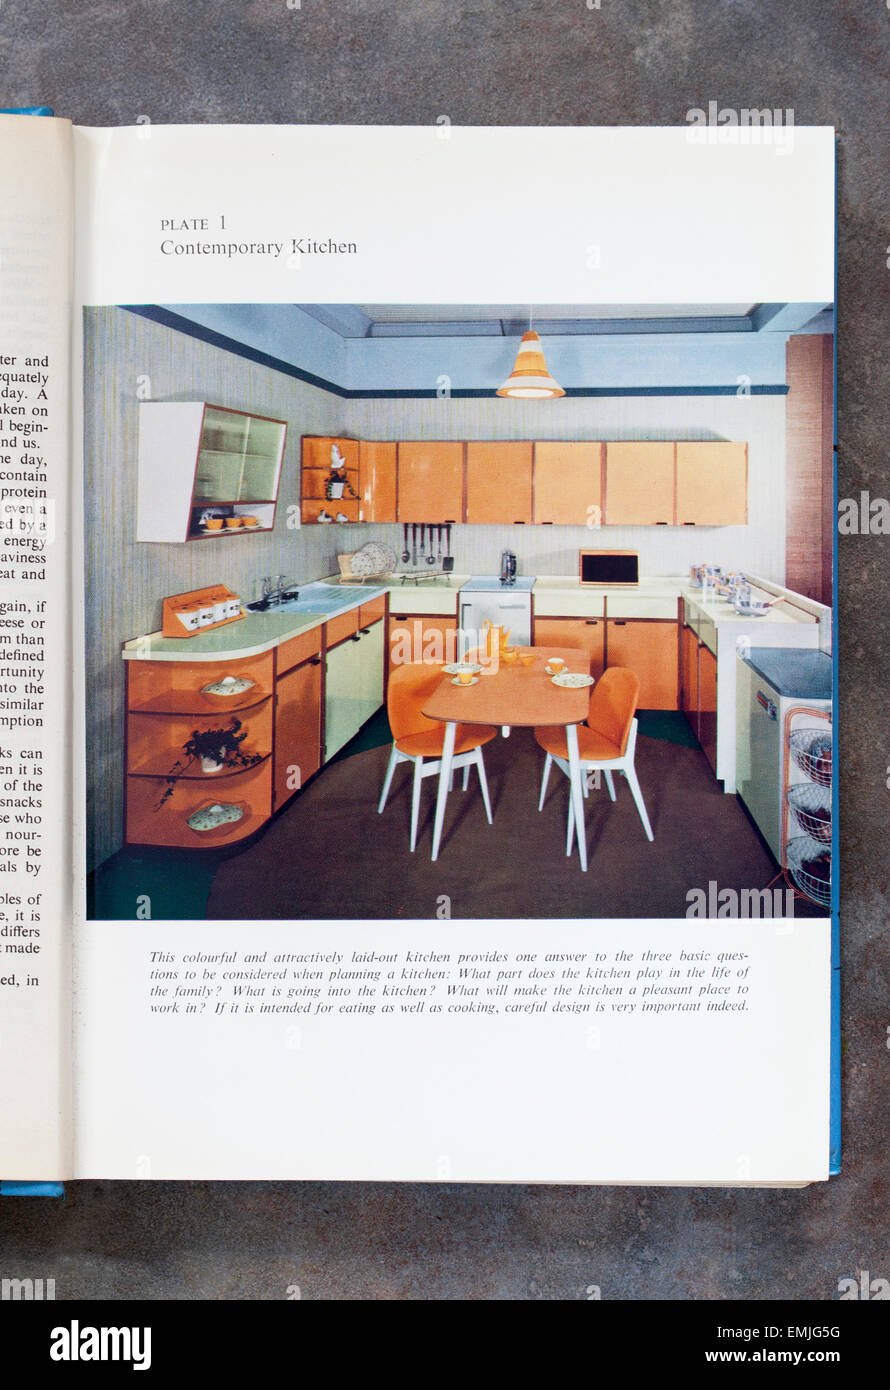 Contemporary Kitchen Page from Mrs Beetons Everyday Cookery Book Stock Photo